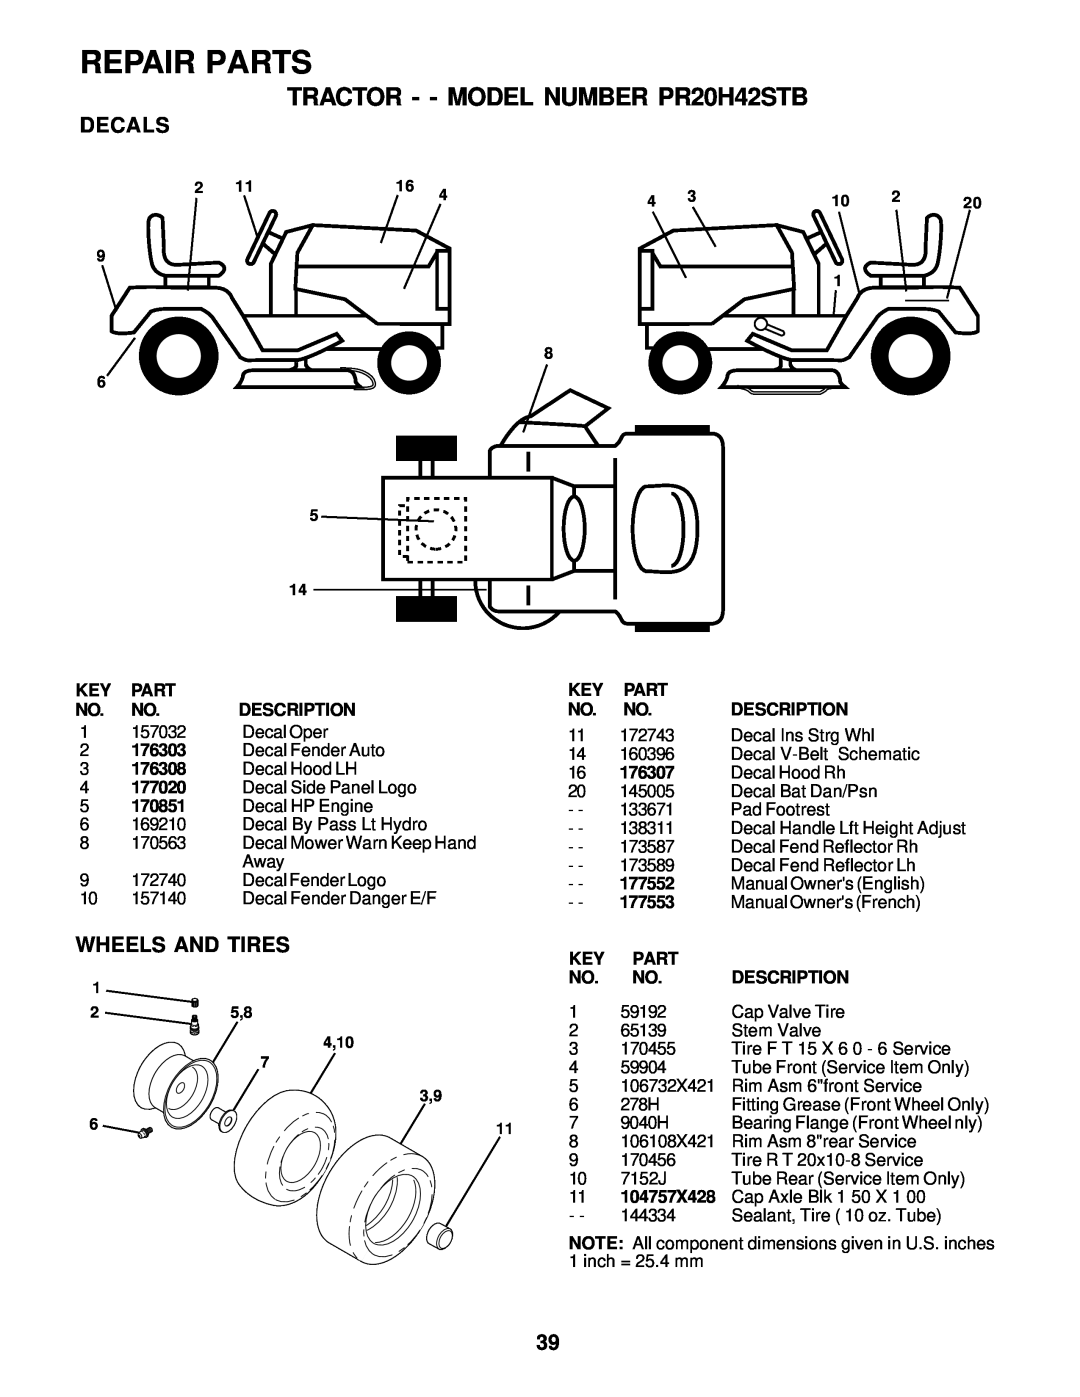 Poulan 177552 owner manual Decals, Wheels And Tires, Repair Parts, TRACTOR - - MODEL NUMBER PR20H42STB 